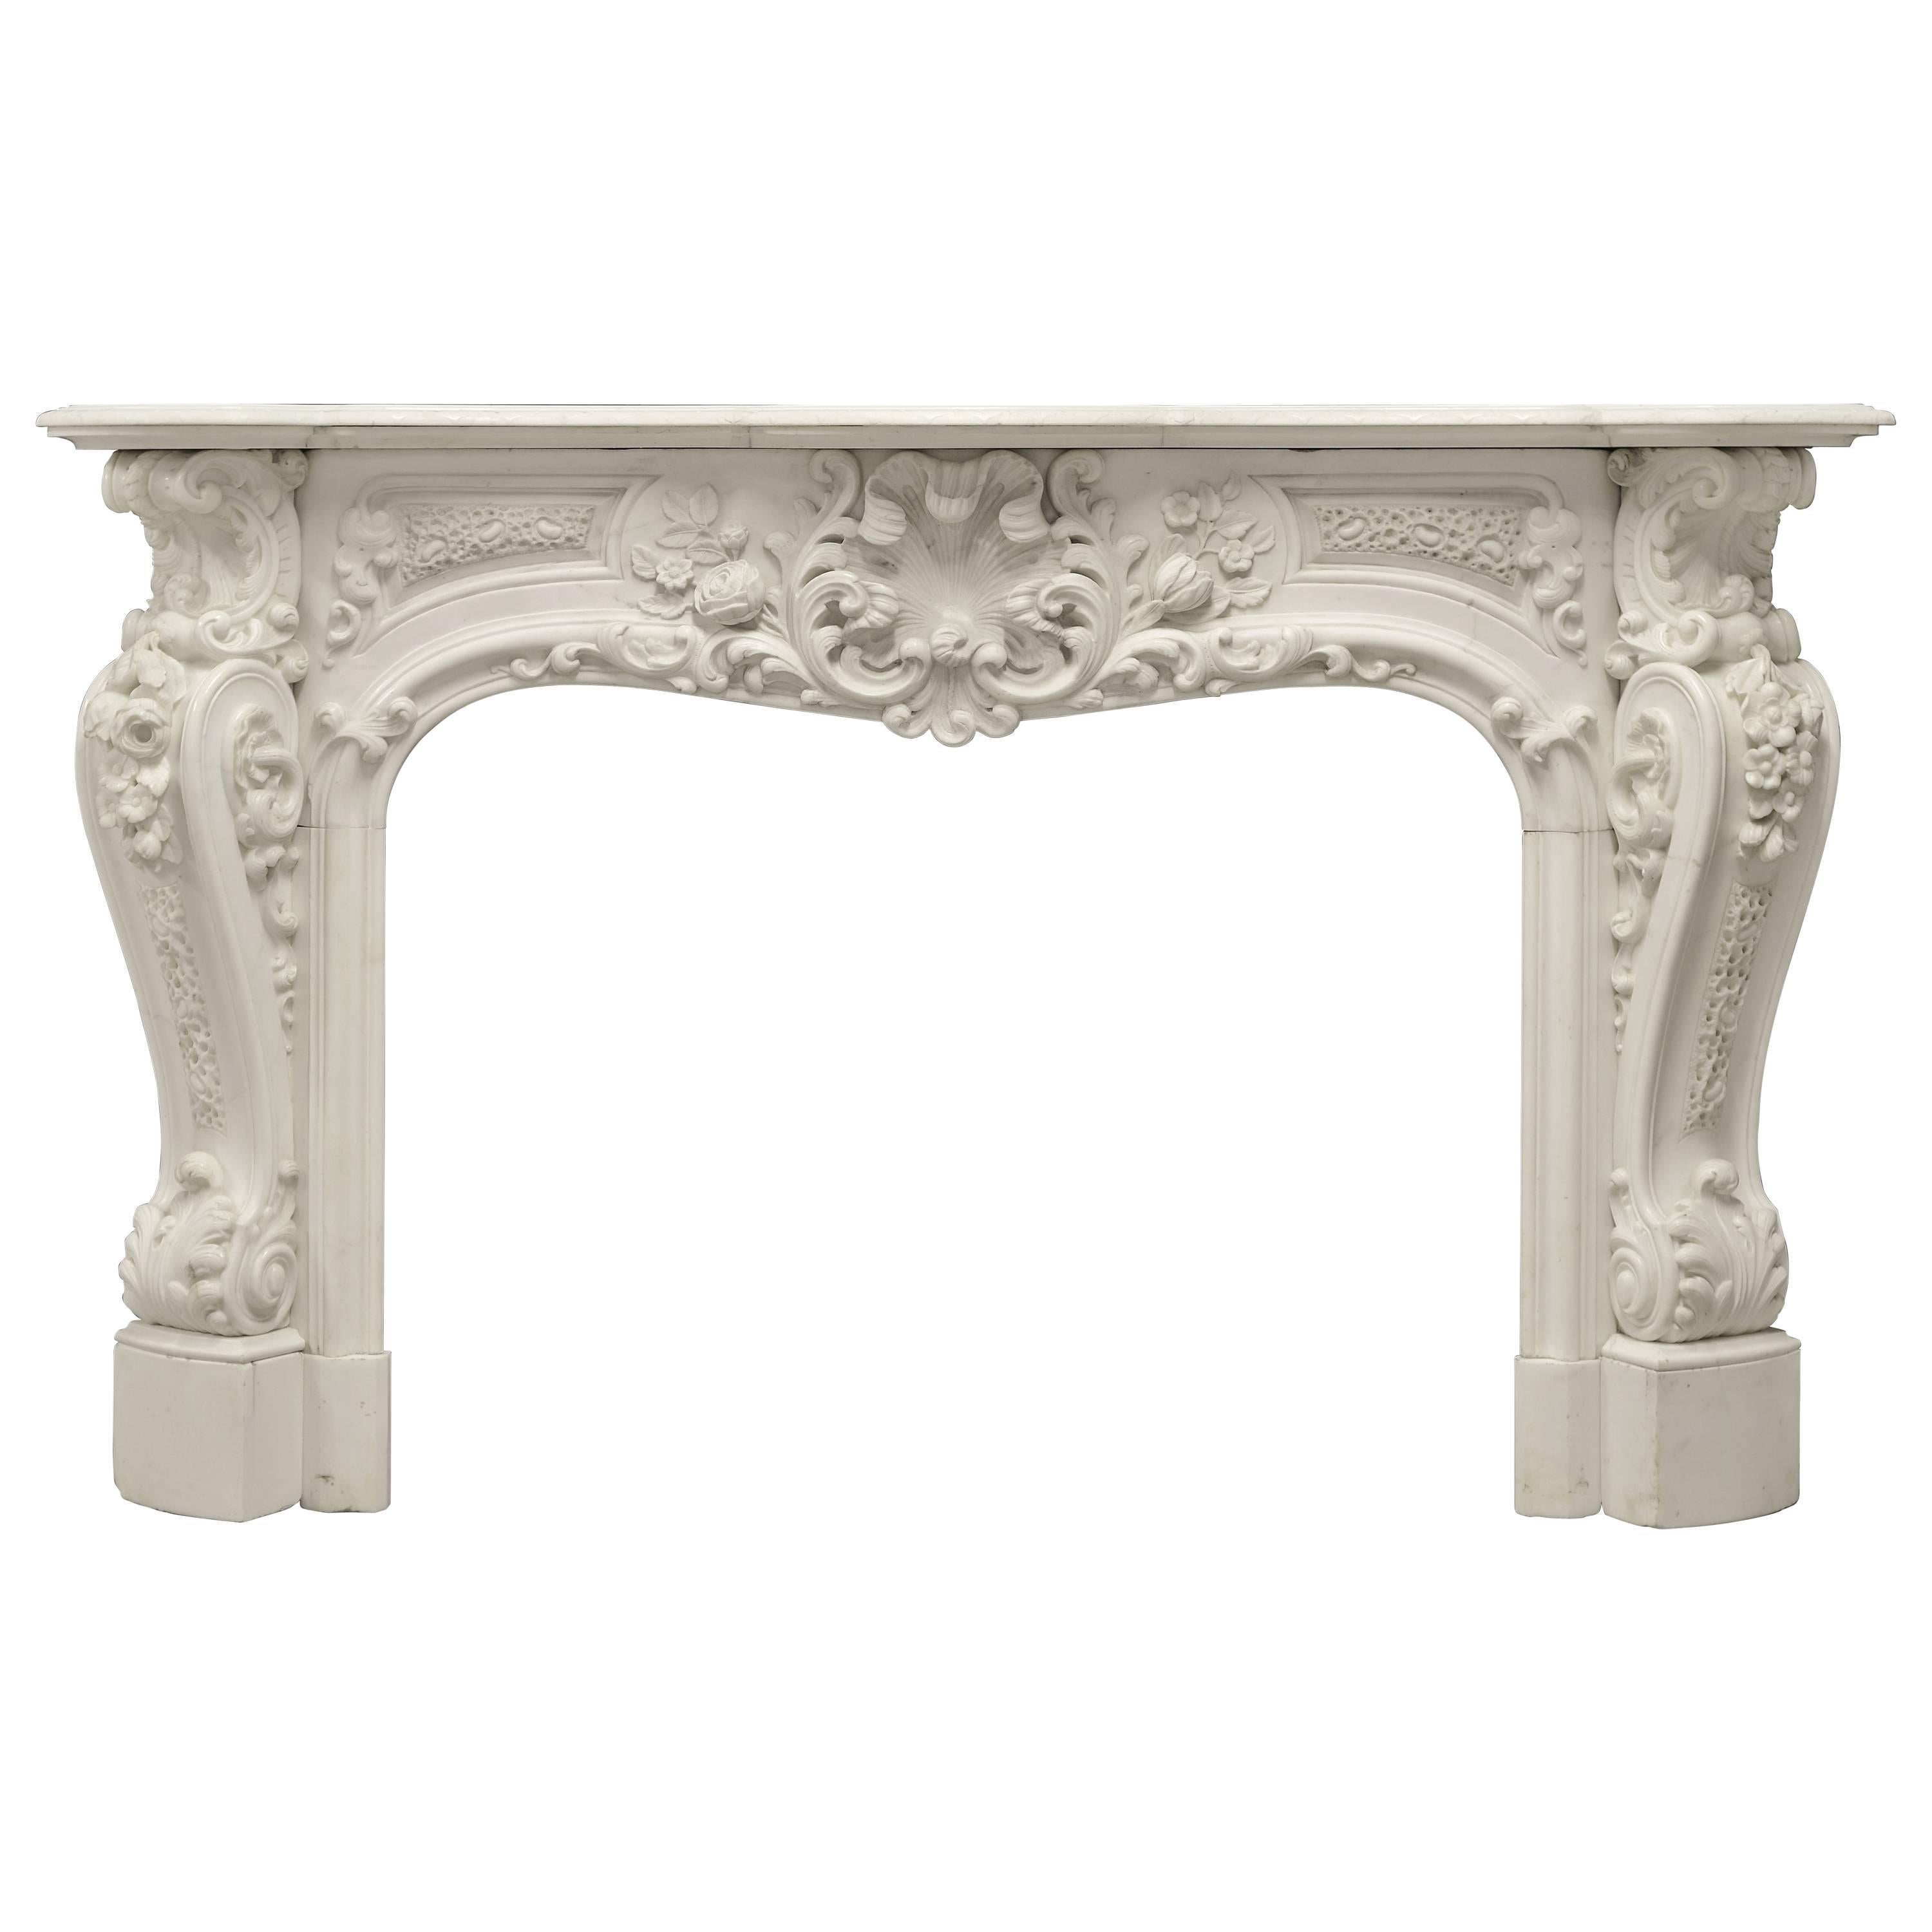 Beautiful, Highly Ornated Floral White Marble Louis XV Fireplace Mantel